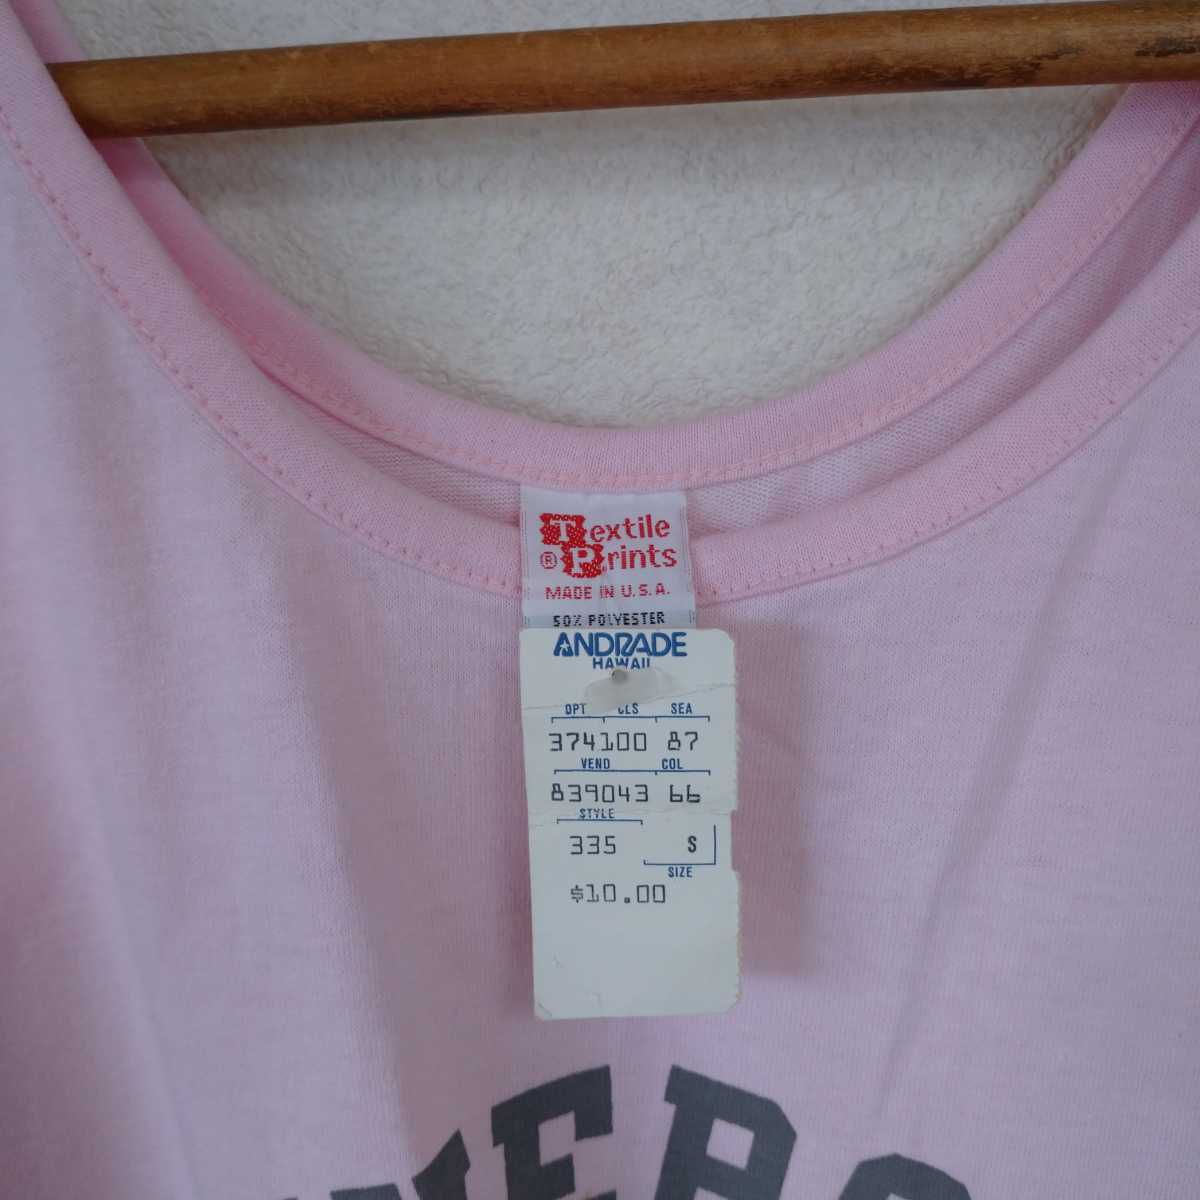  dead tag attaching USA made Hawaii university tank top pink S